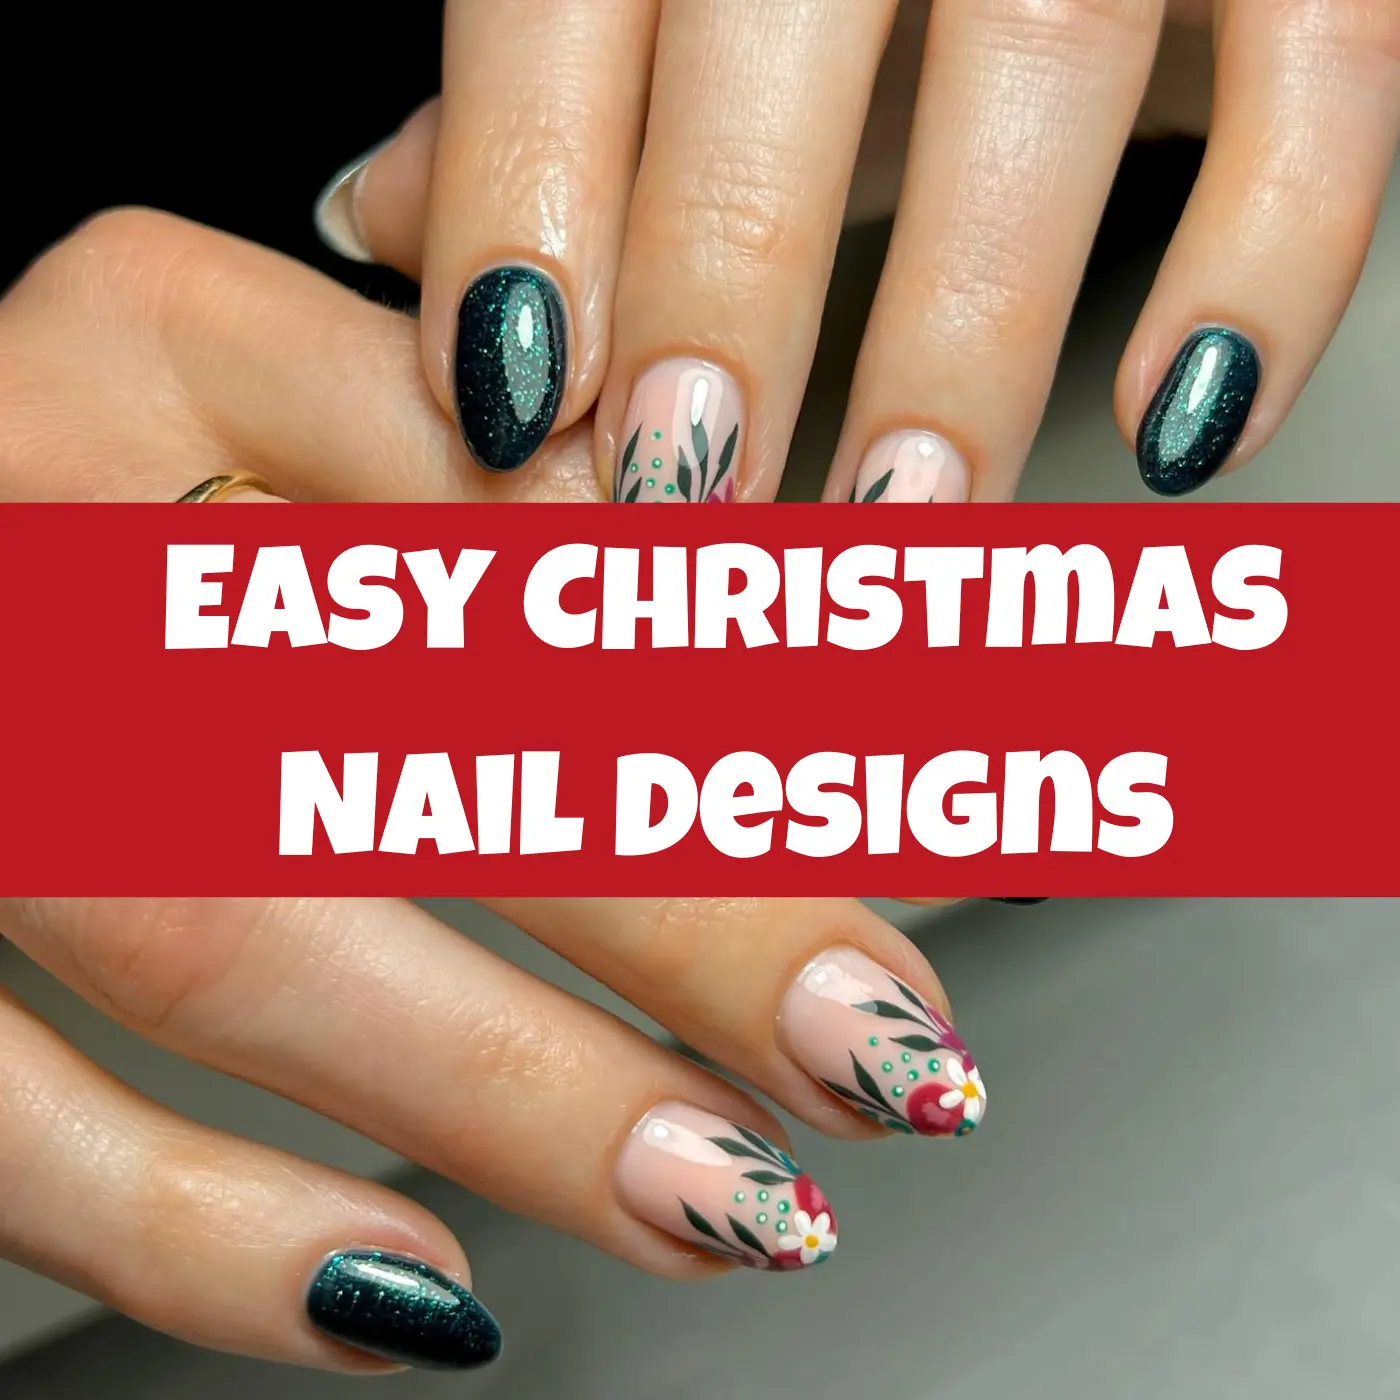 easy Christmas nail designs by Very Easy Makeup